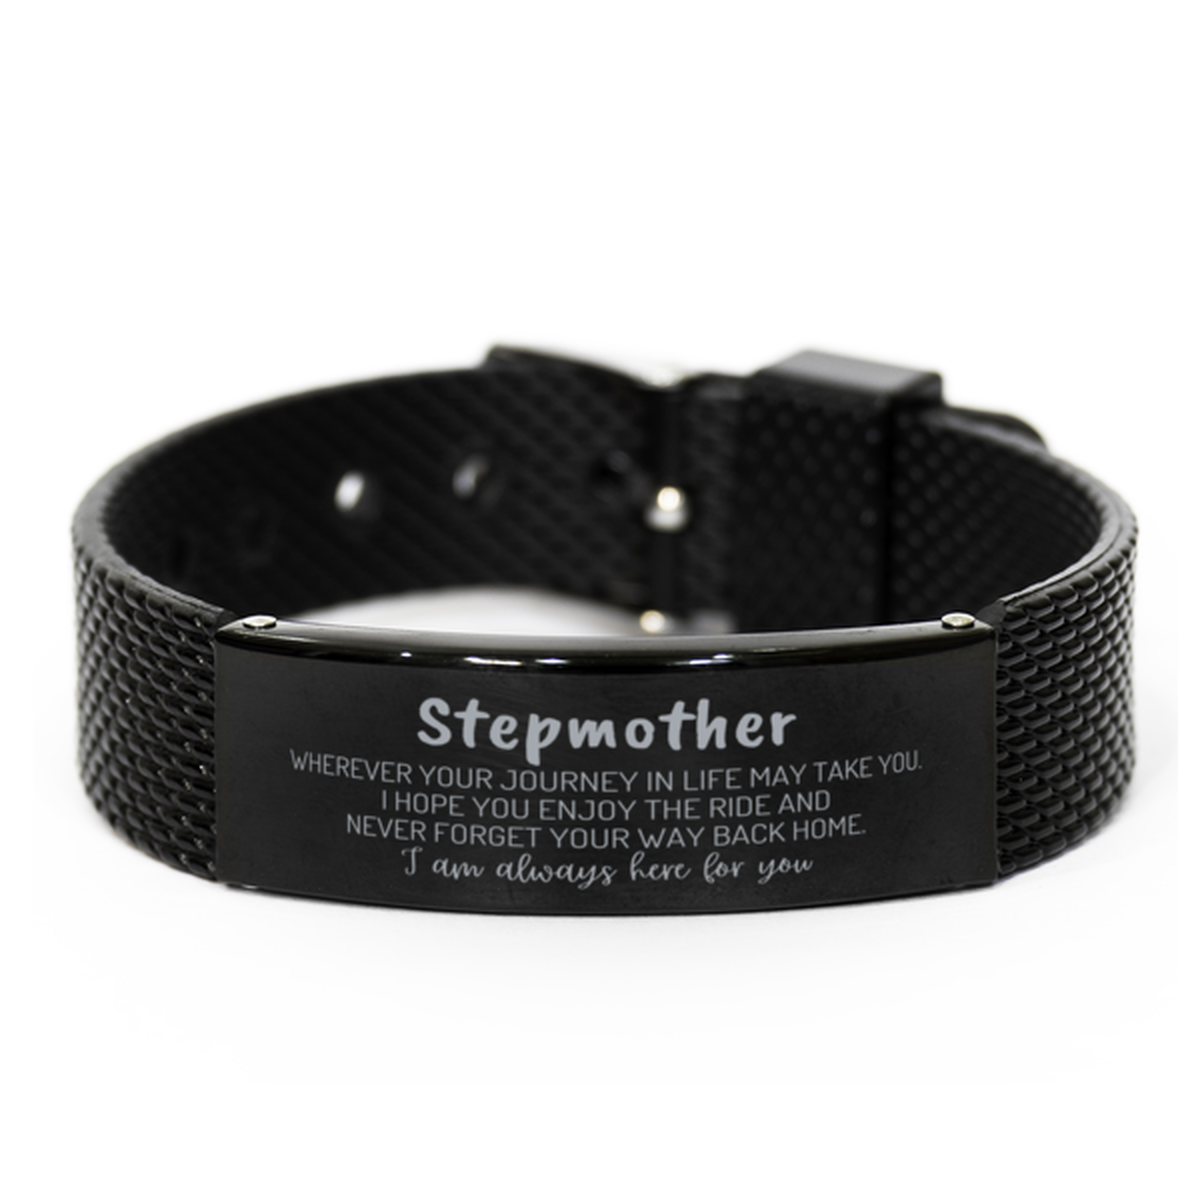 Stepmother wherever your journey in life may take you, I am always here for you Stepmother Black Shark Mesh Bracelet, Awesome Christmas Gifts For Stepmother, Stepmother Birthday Gifts for Men Women Family Loved One